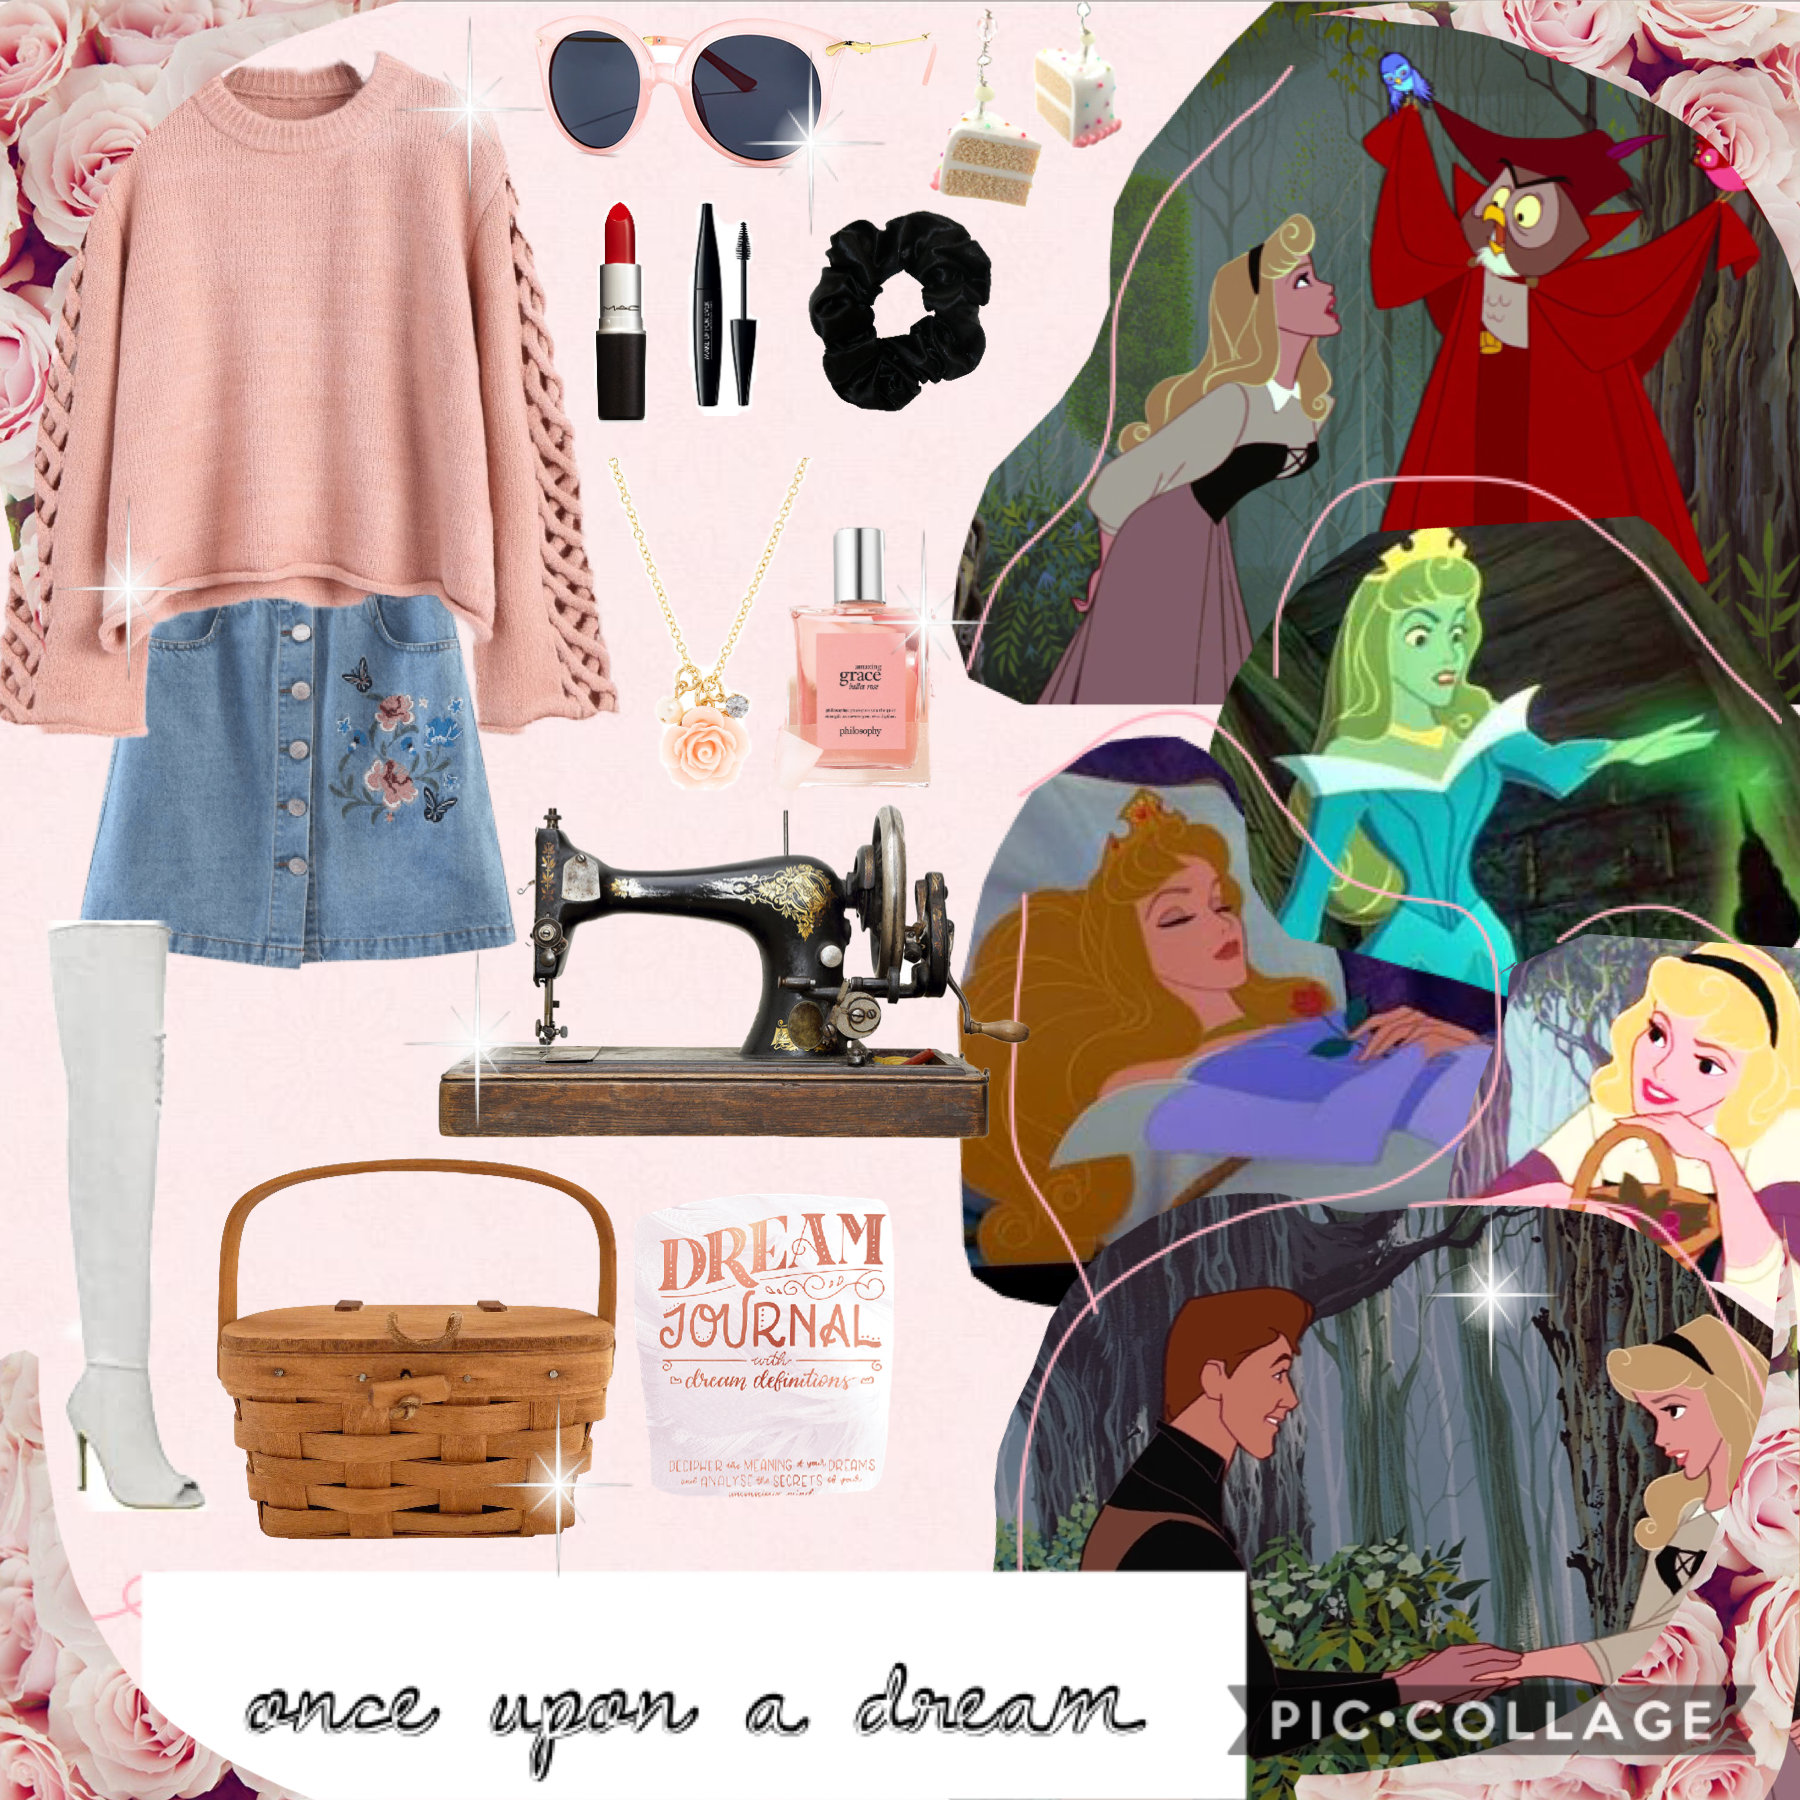 once upon a dream
#sleepingbeauty#aurora#disney#rose#maleficent#fashion#outfits#princess#aesthetic#dream#classic